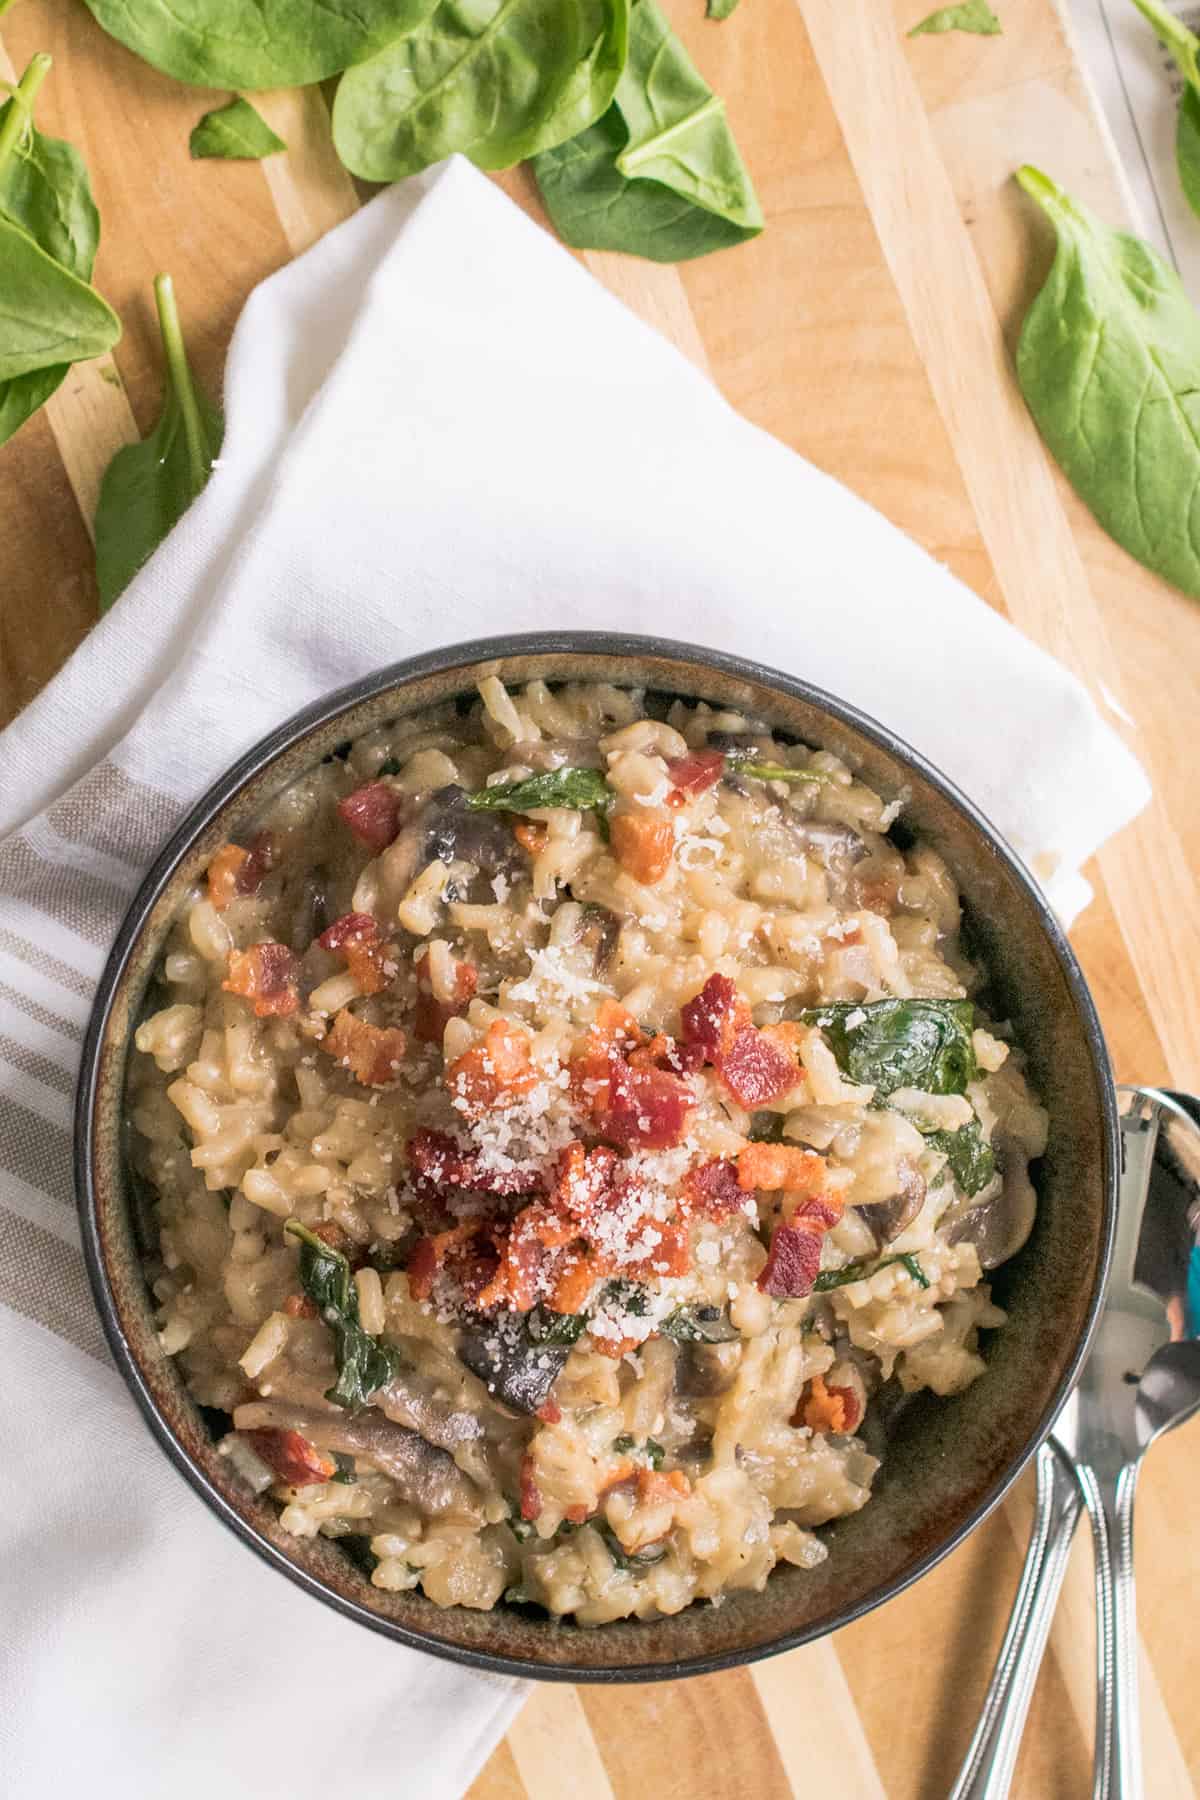 Bacon Mushroom Risotto with spinach in dark bowl on wooden cutting board,